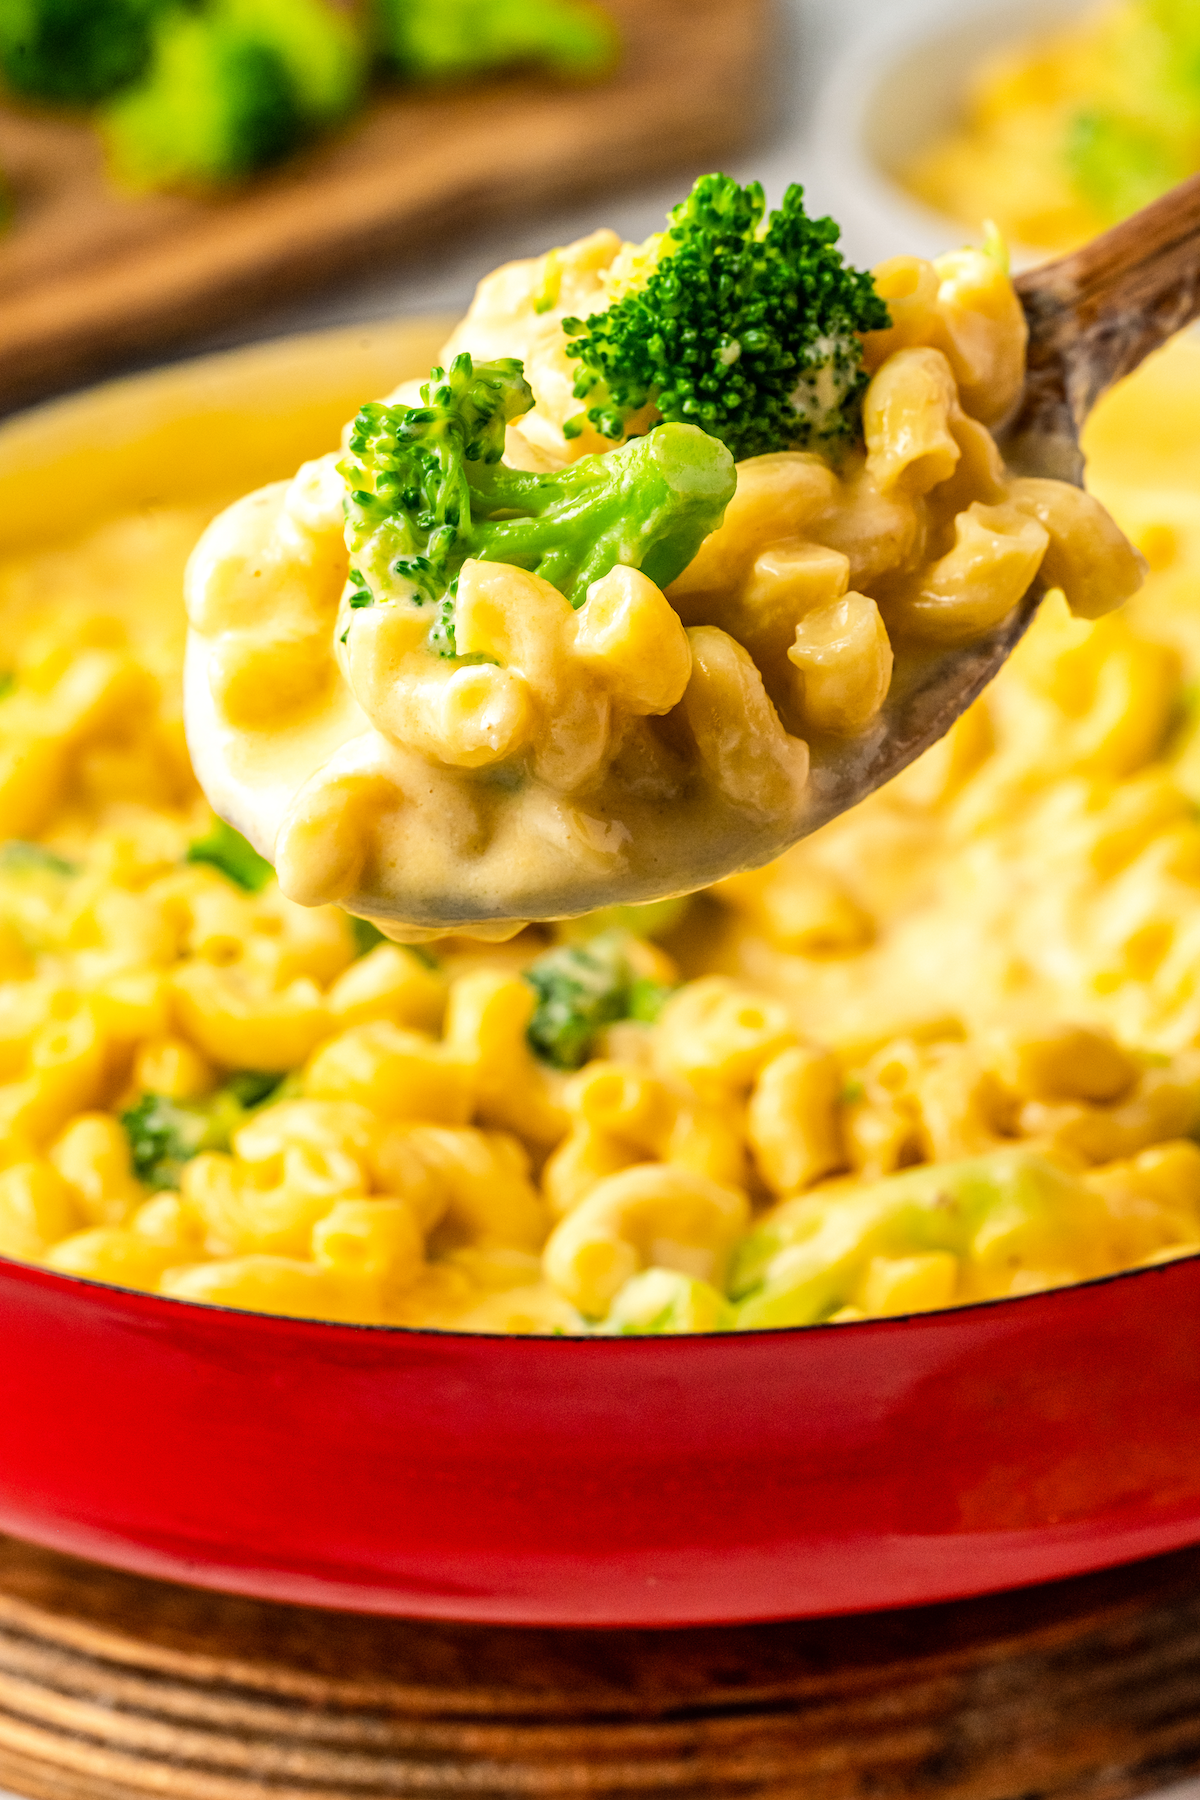 Spoonful of mac and cheese with broccoli.